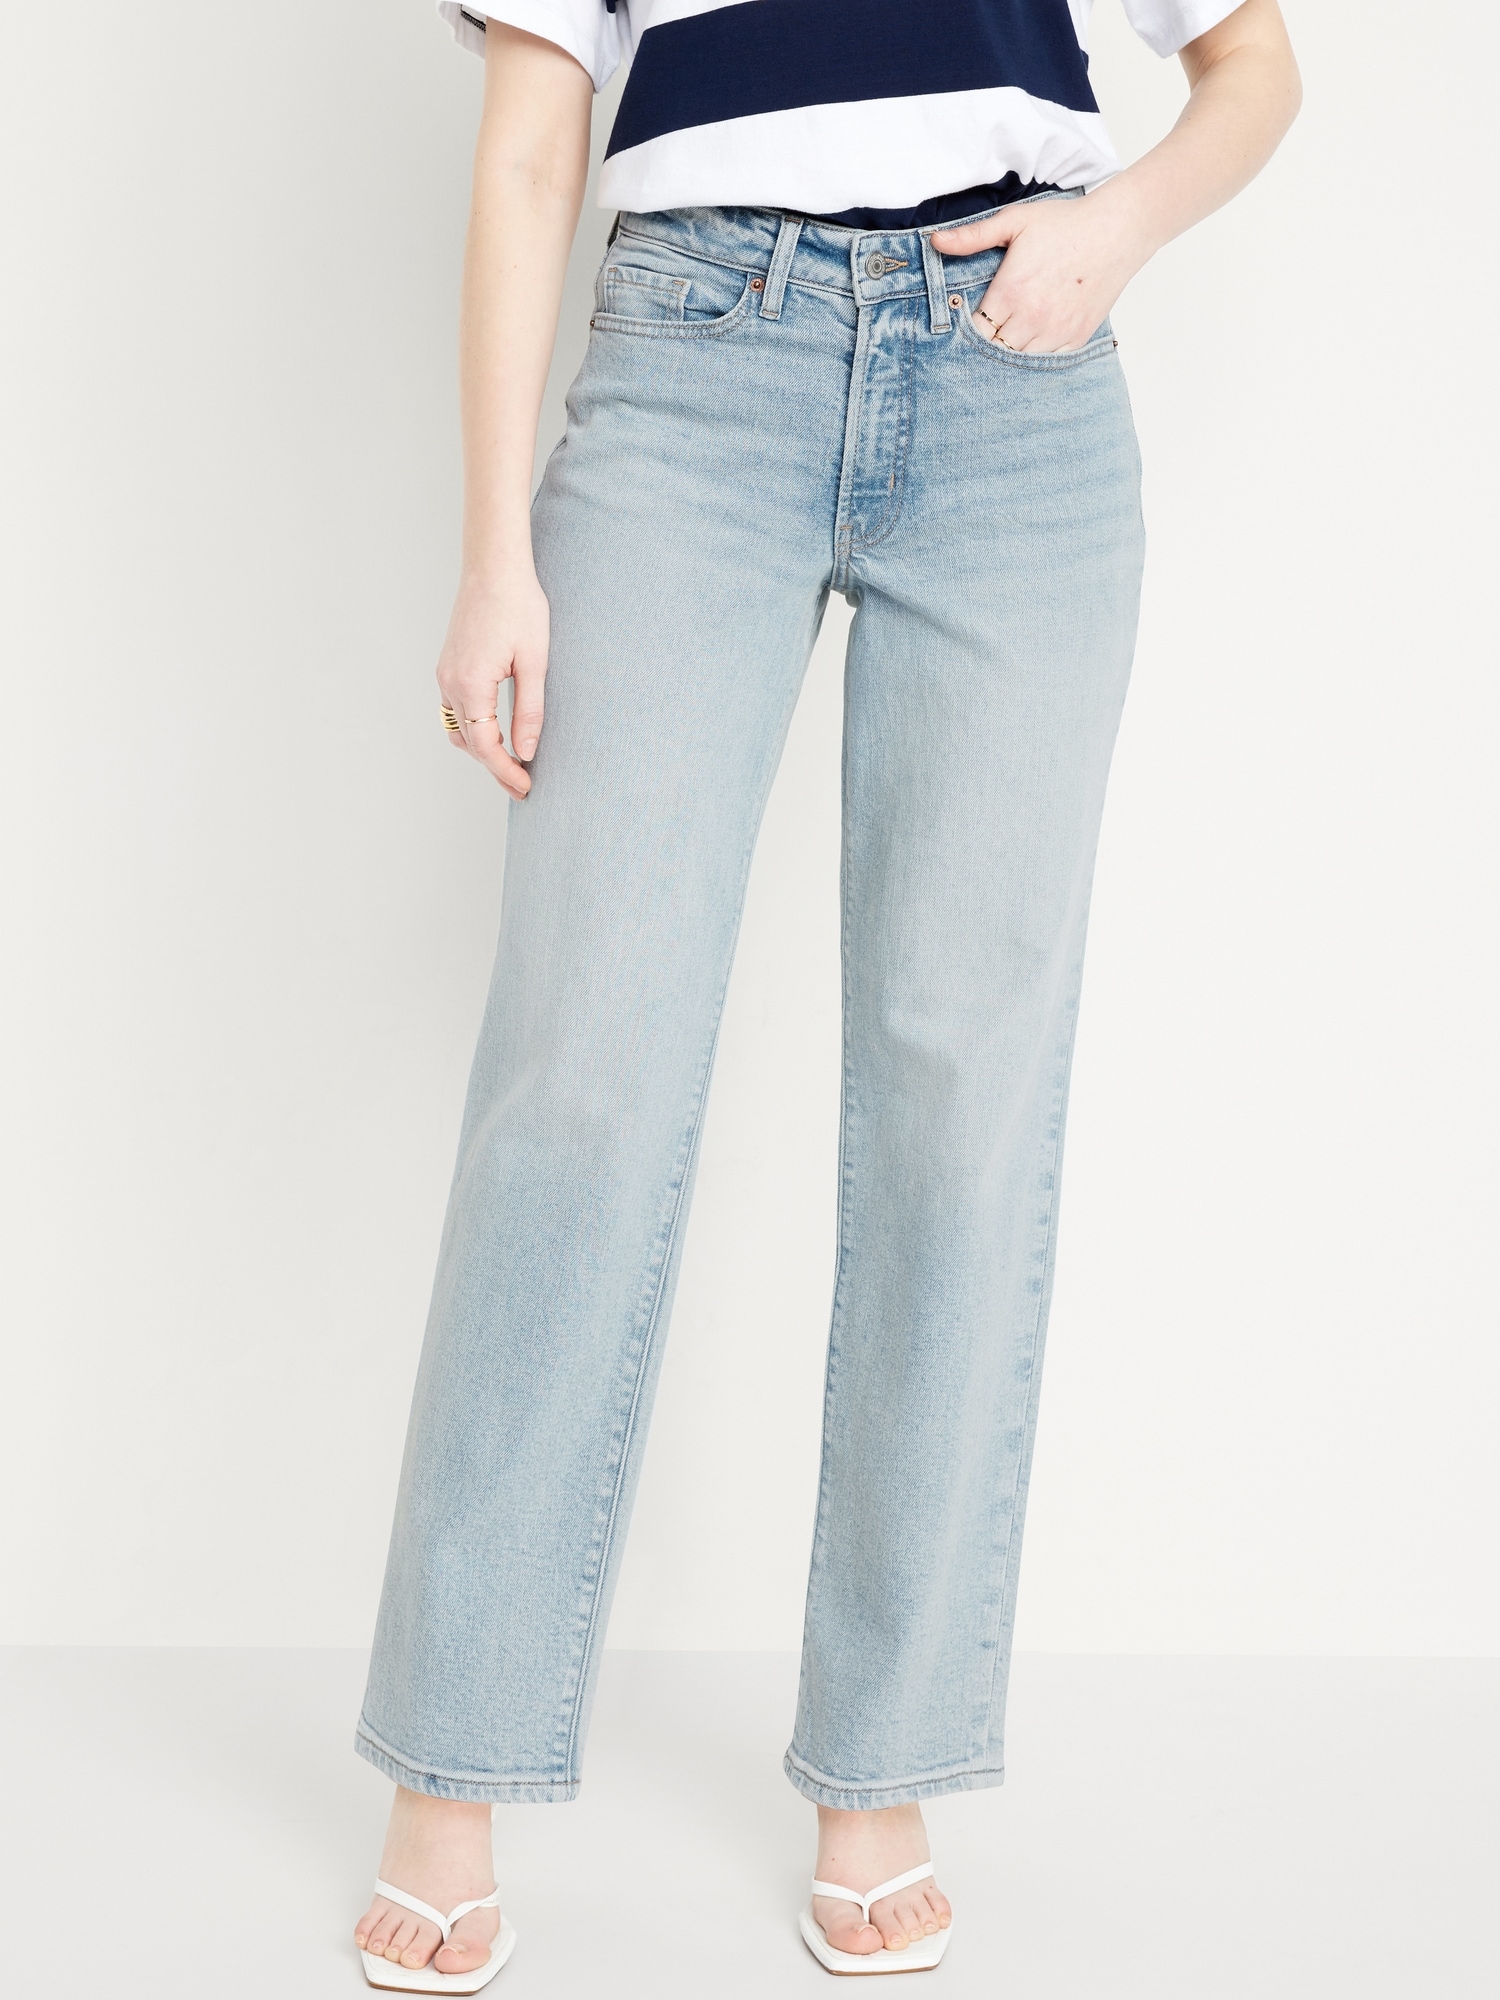 Curvy High-Waisted OG Loose Ripped Jeans for Women